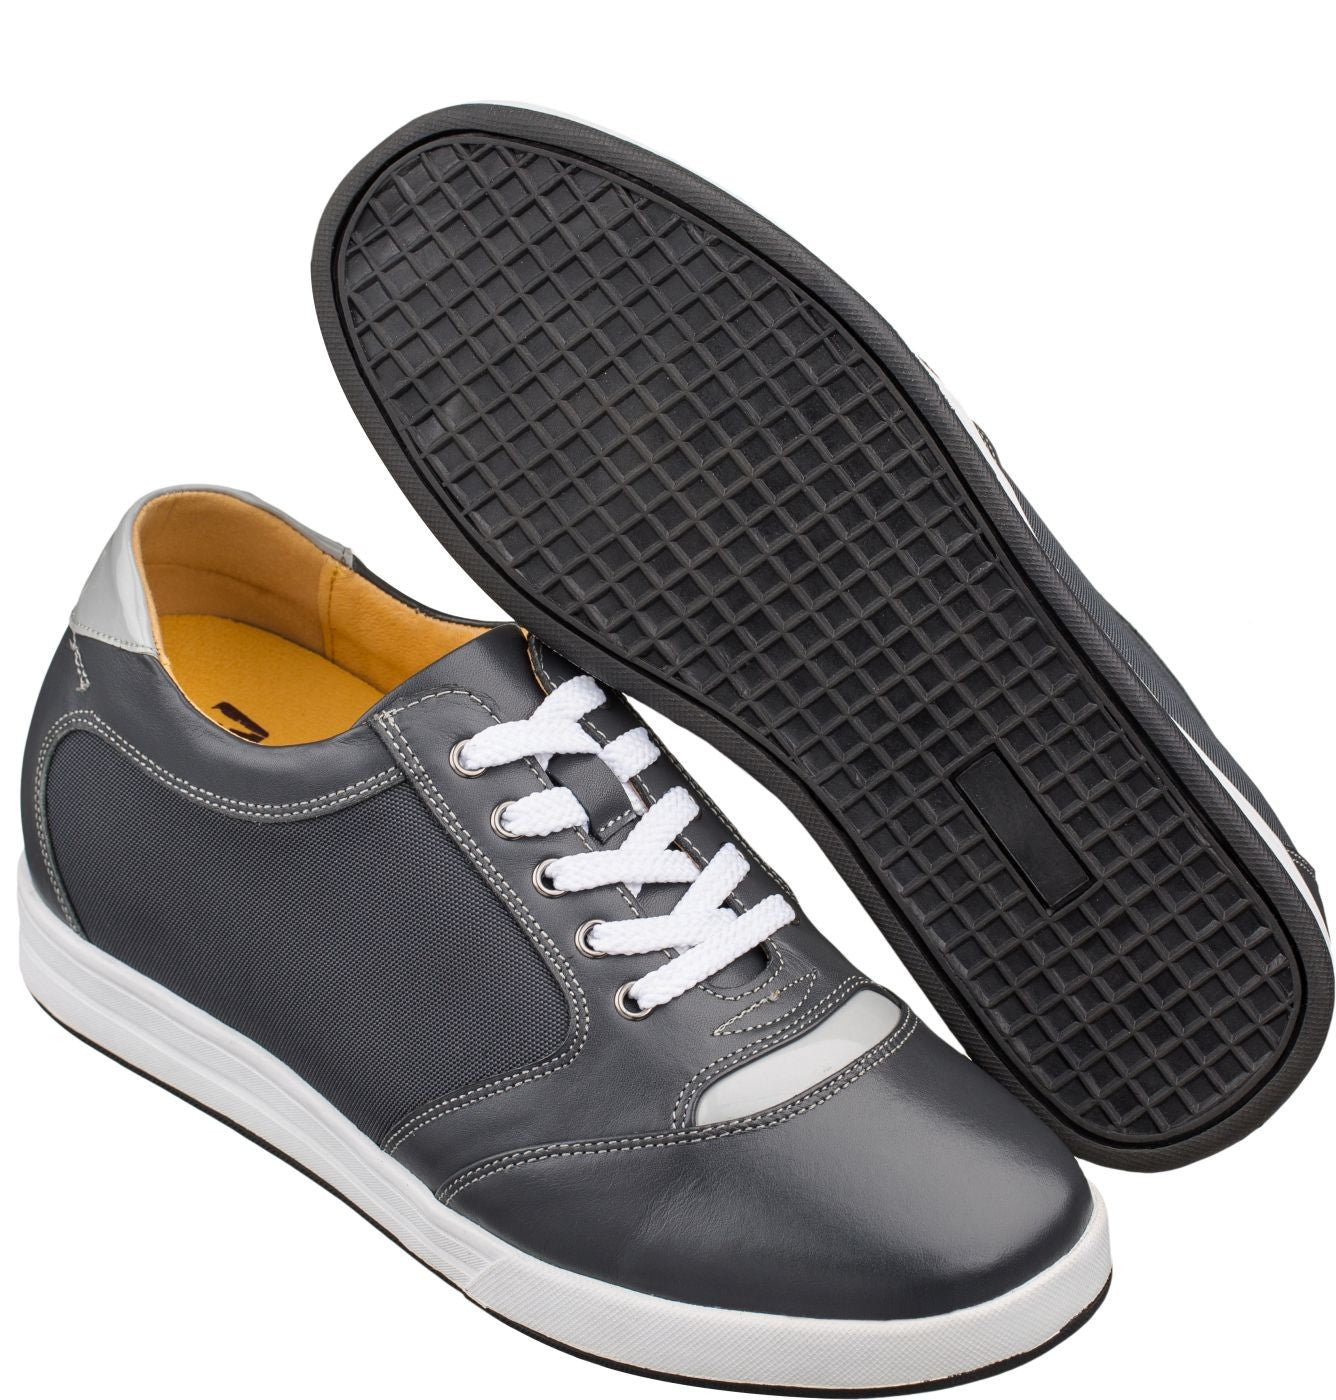 Elevator shoes height increase TOTO - A5327 - 3.2 Inches Taller (Grey)